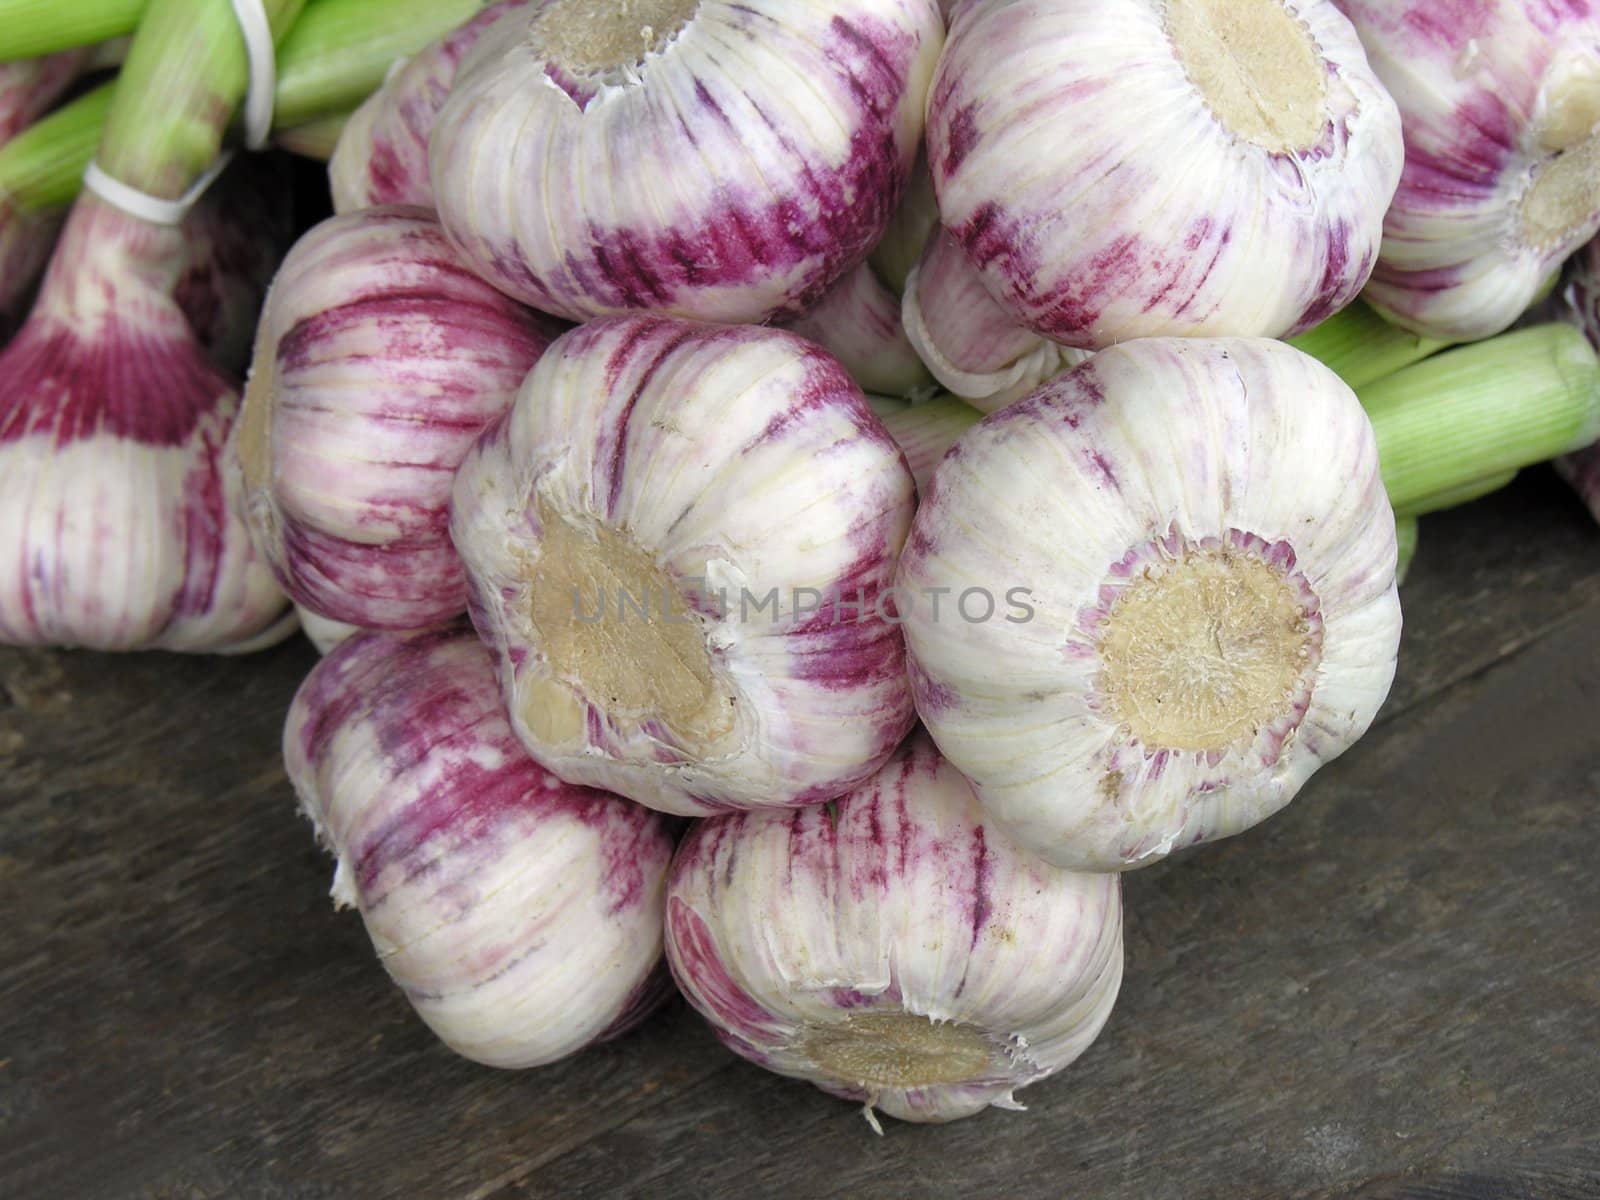 very wholesome vegetable as natural medicine